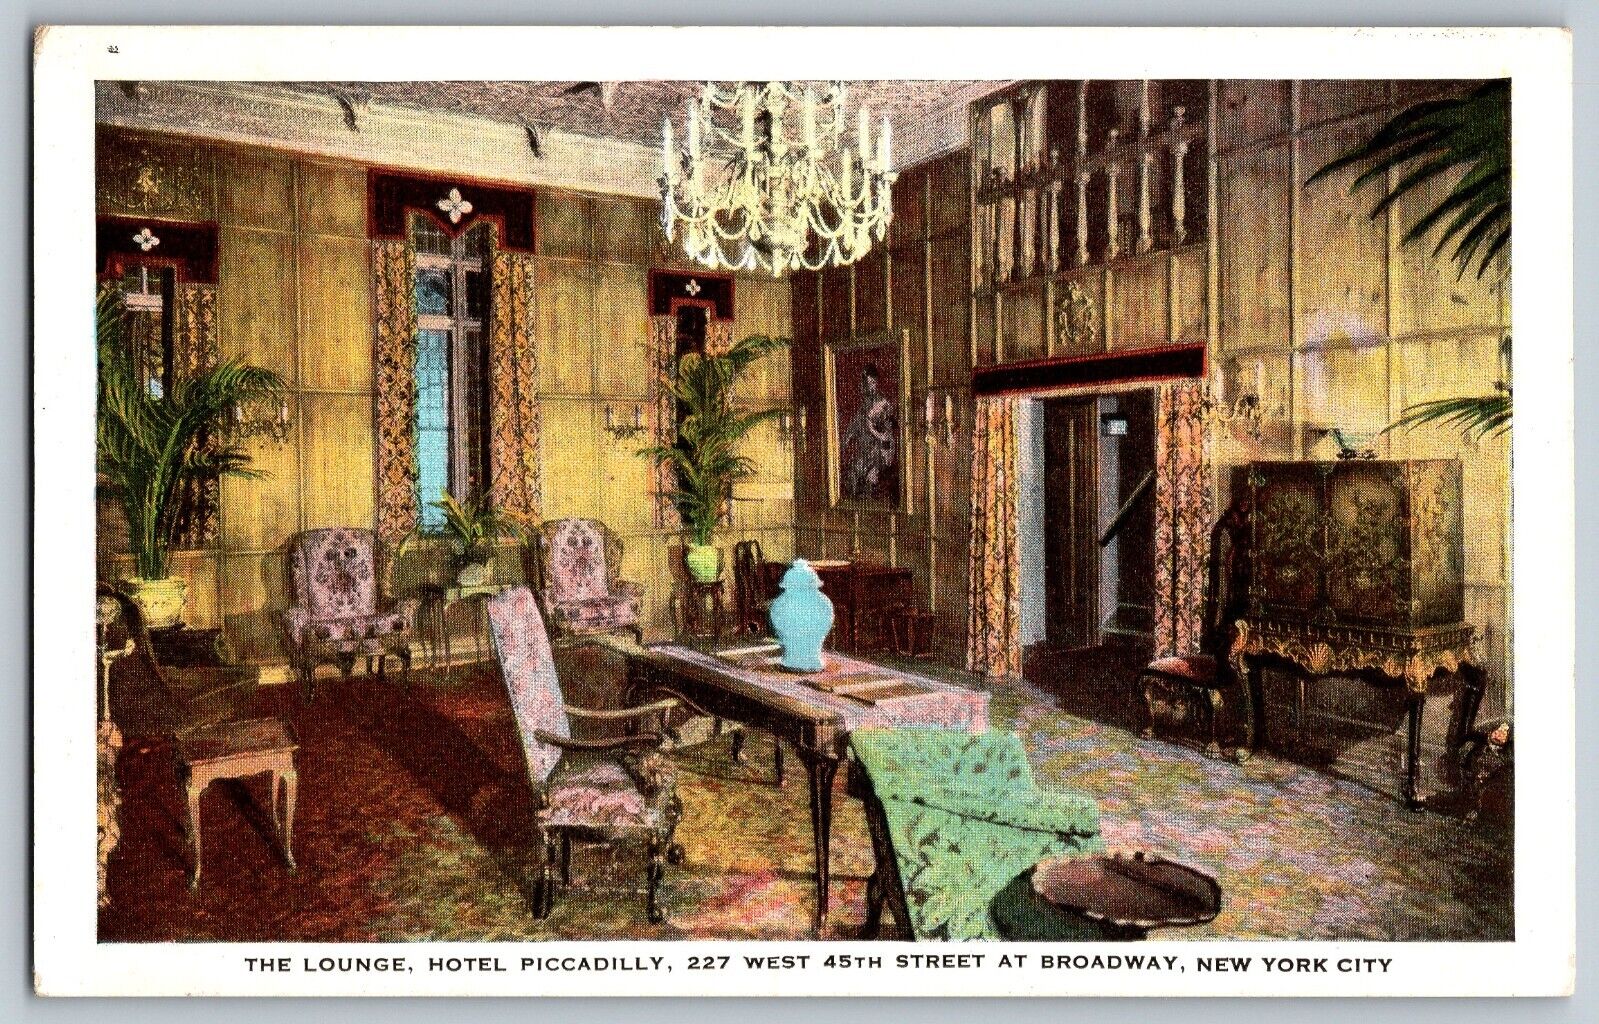 New York City NY - Hotel Piccadilly - Lounge Area - Vintage Postcard - Unposted